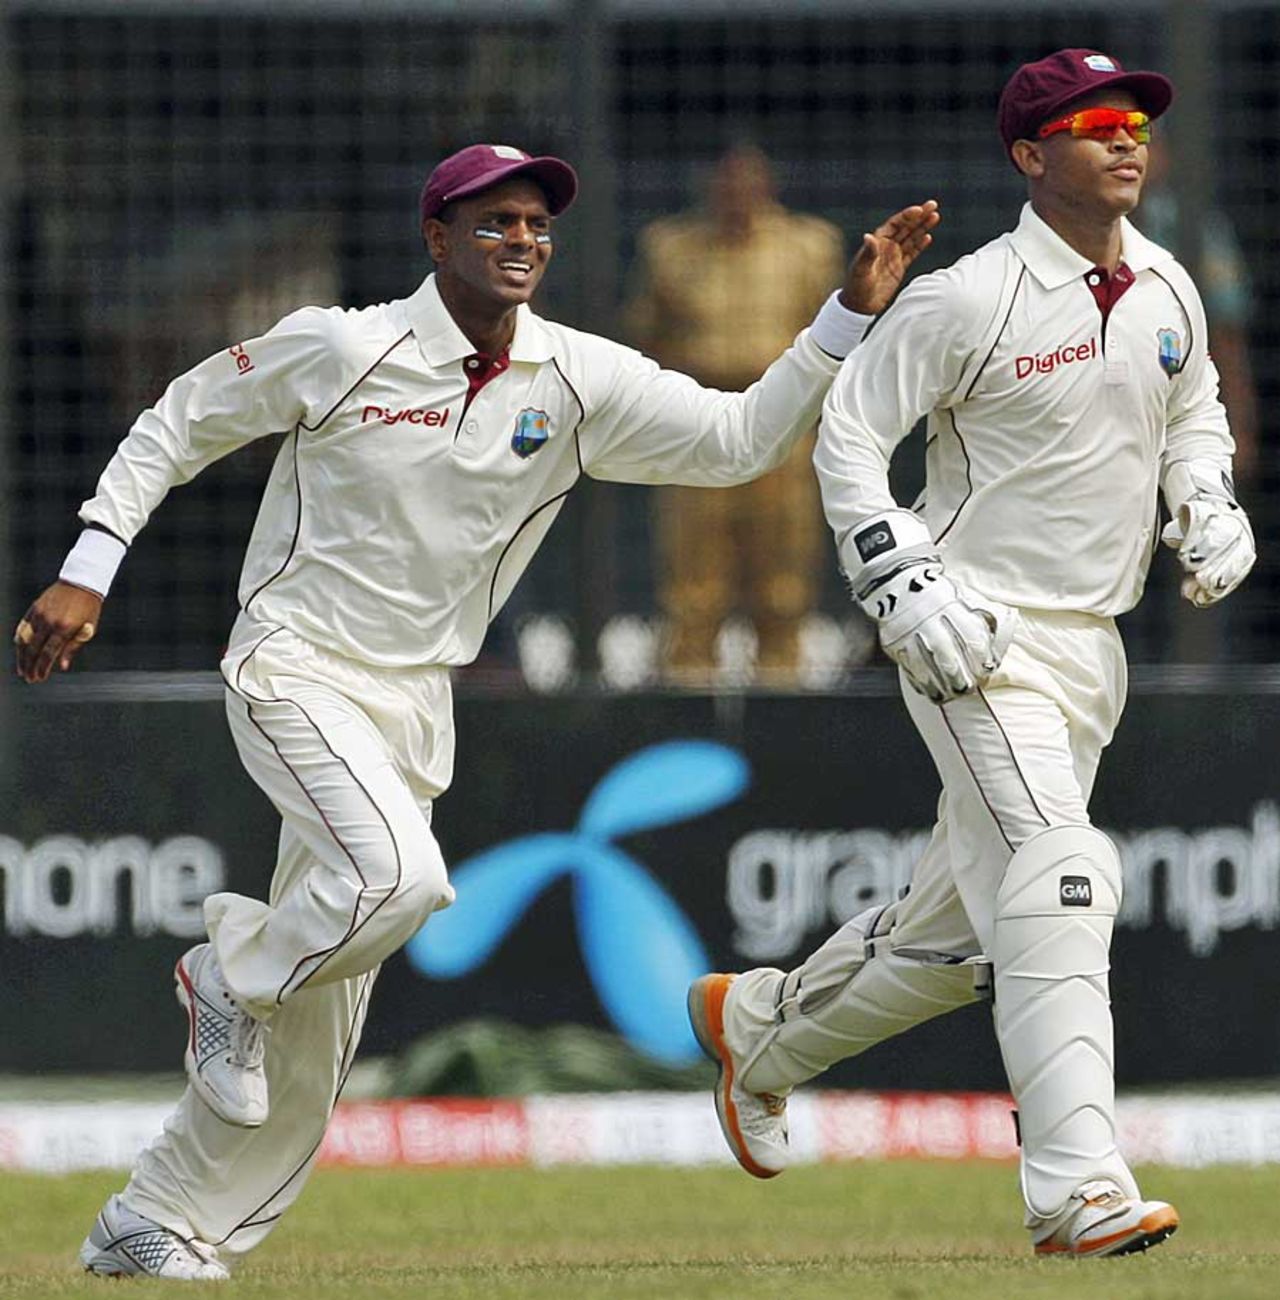 Shivnarine Chanderpaul and Carlton Baugh celebrate Imrul Kayes' wicket, Bangladesh v West Indies, 1st Test, Chittagong, 1st day, October 21, 2011